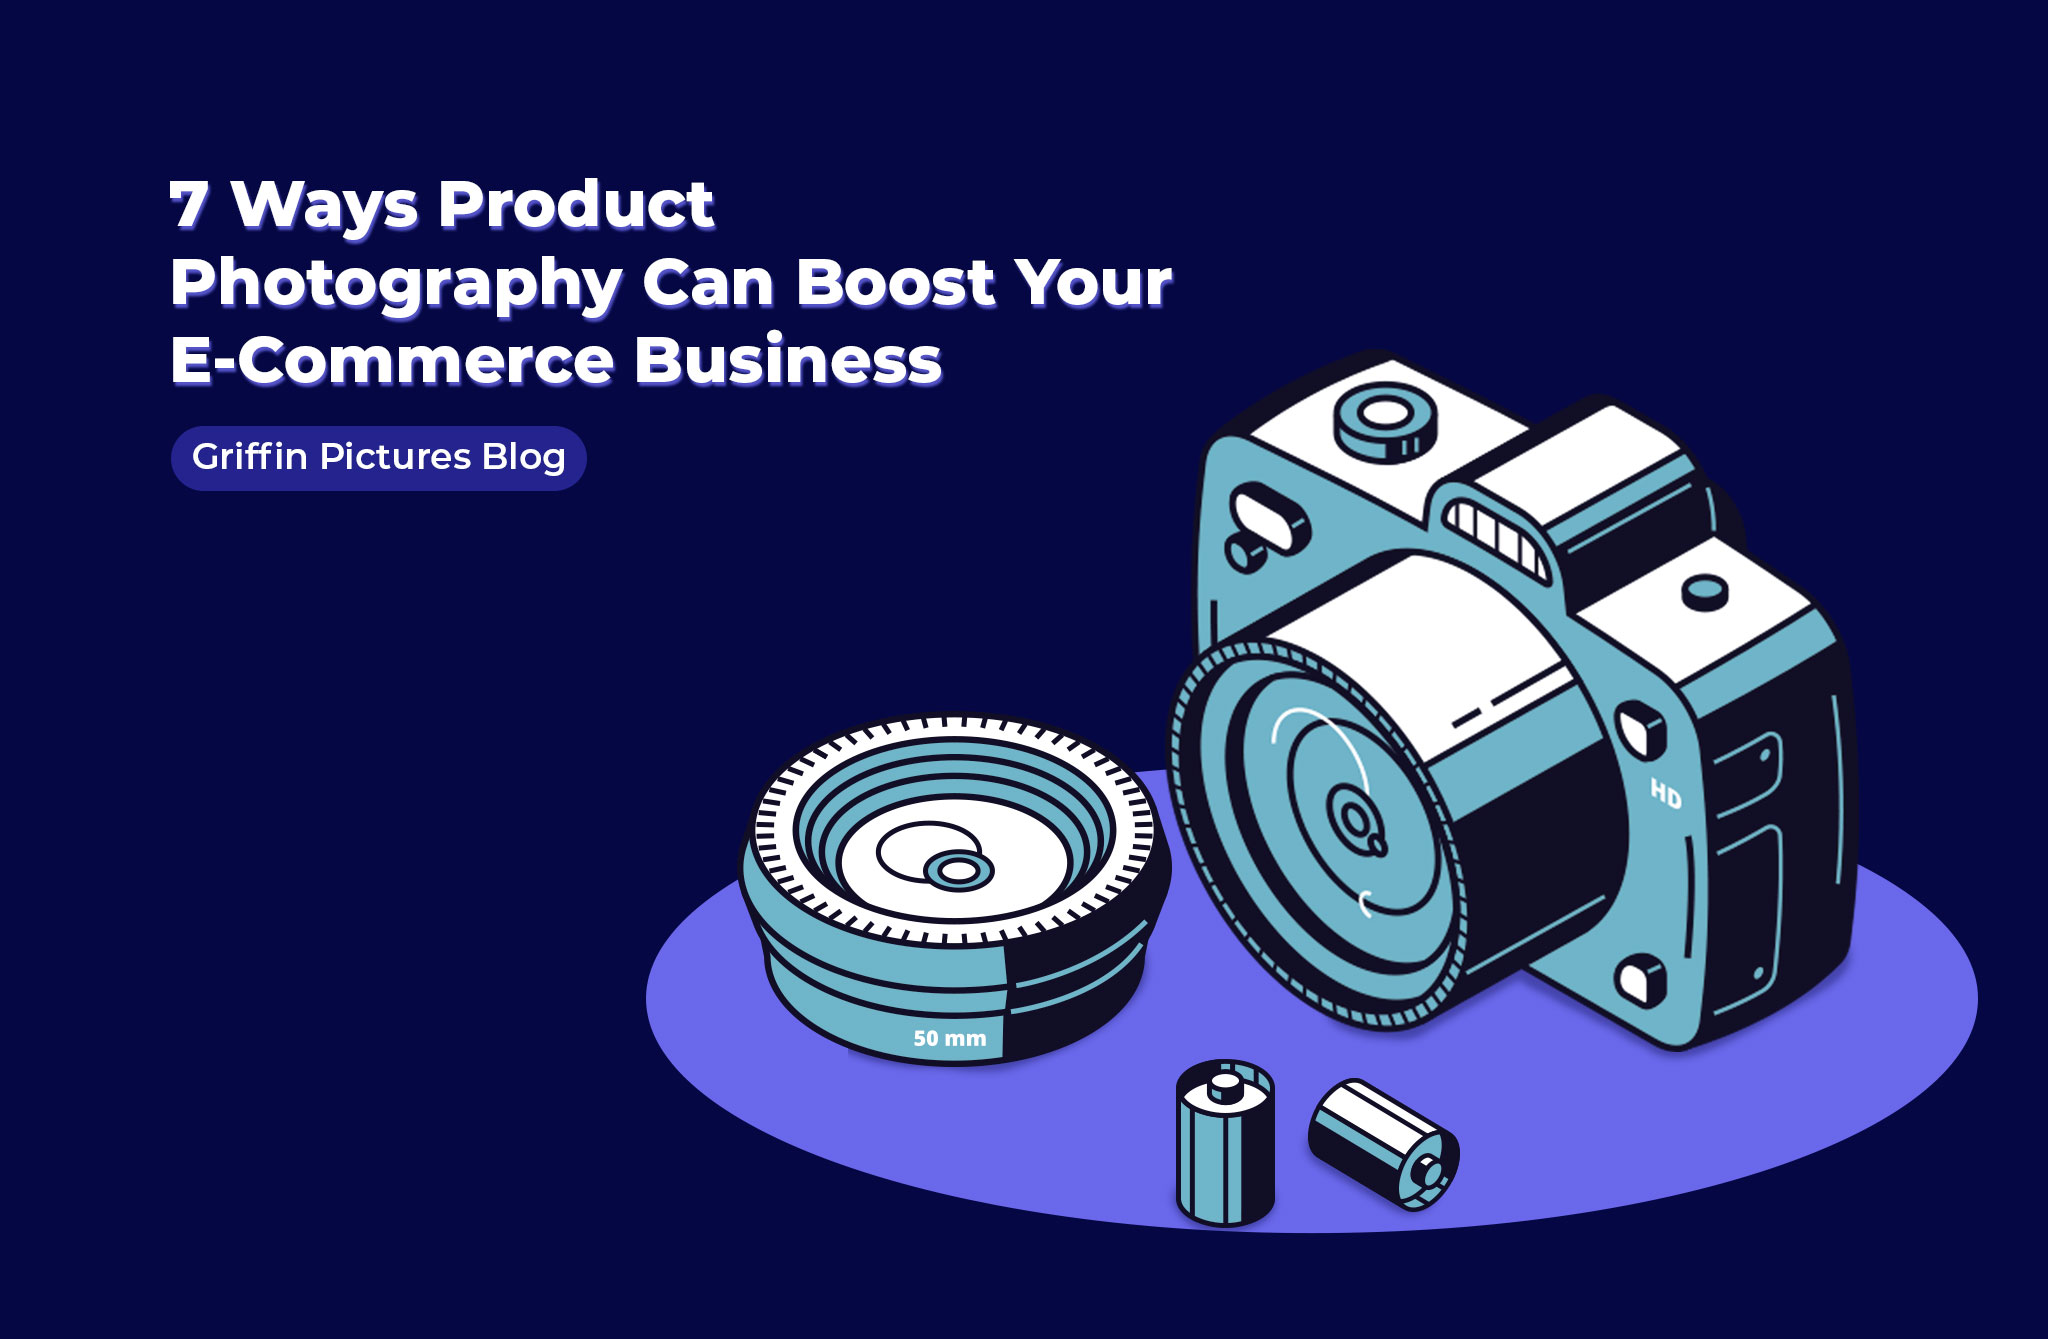 How Product Photography Can Boost Your E-Commerce Business